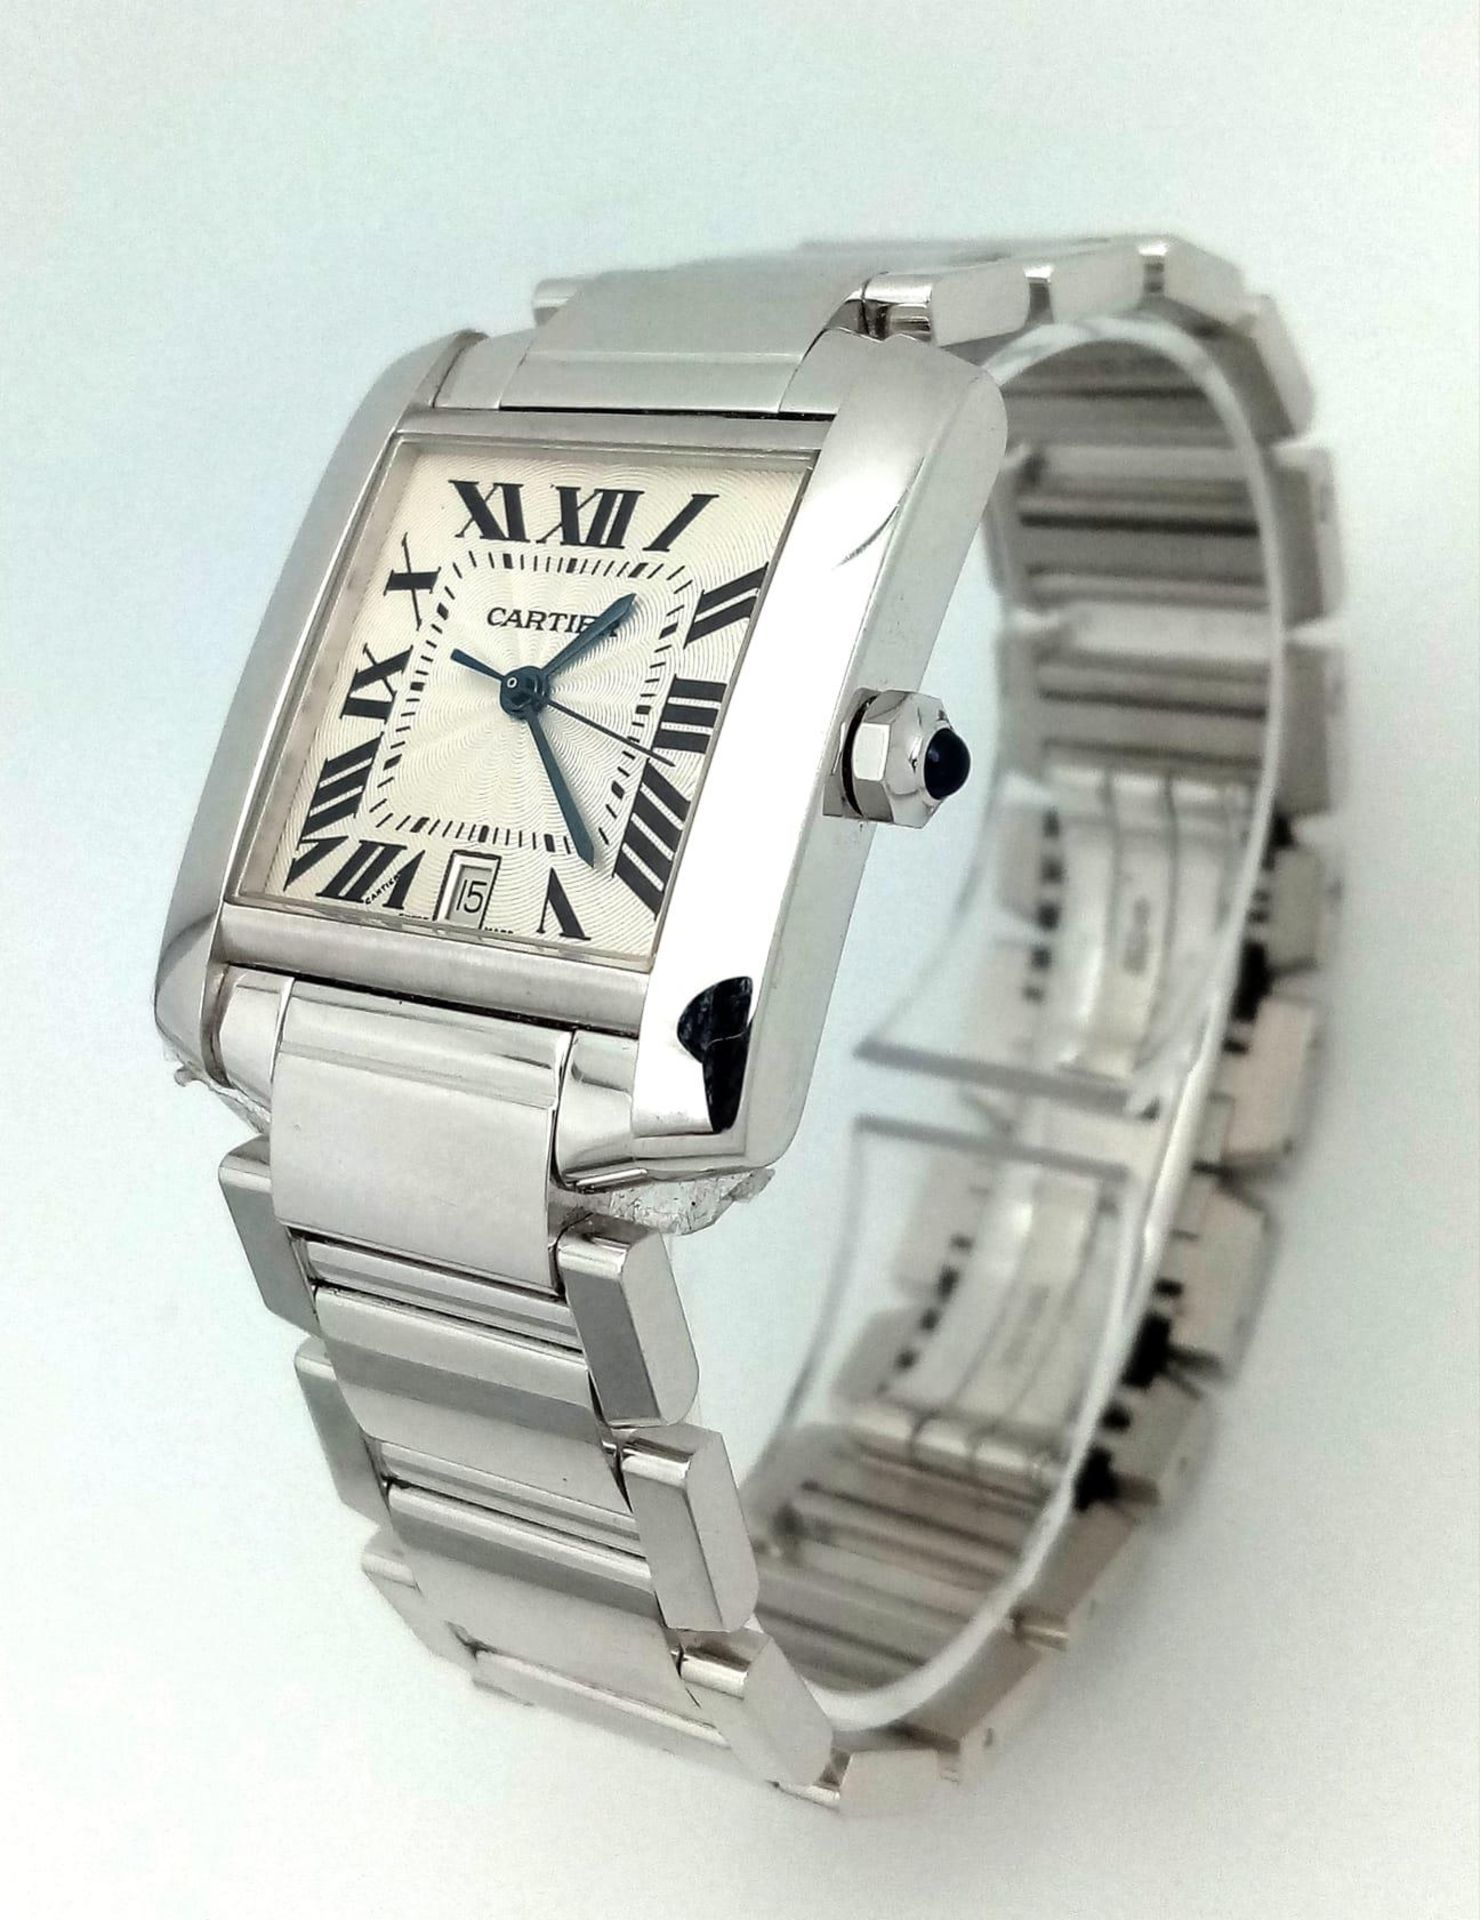 An 18K White Gold Cartier Francaise Tank Automatic Gents Watch. 18k gold bracelet and case - 28mm